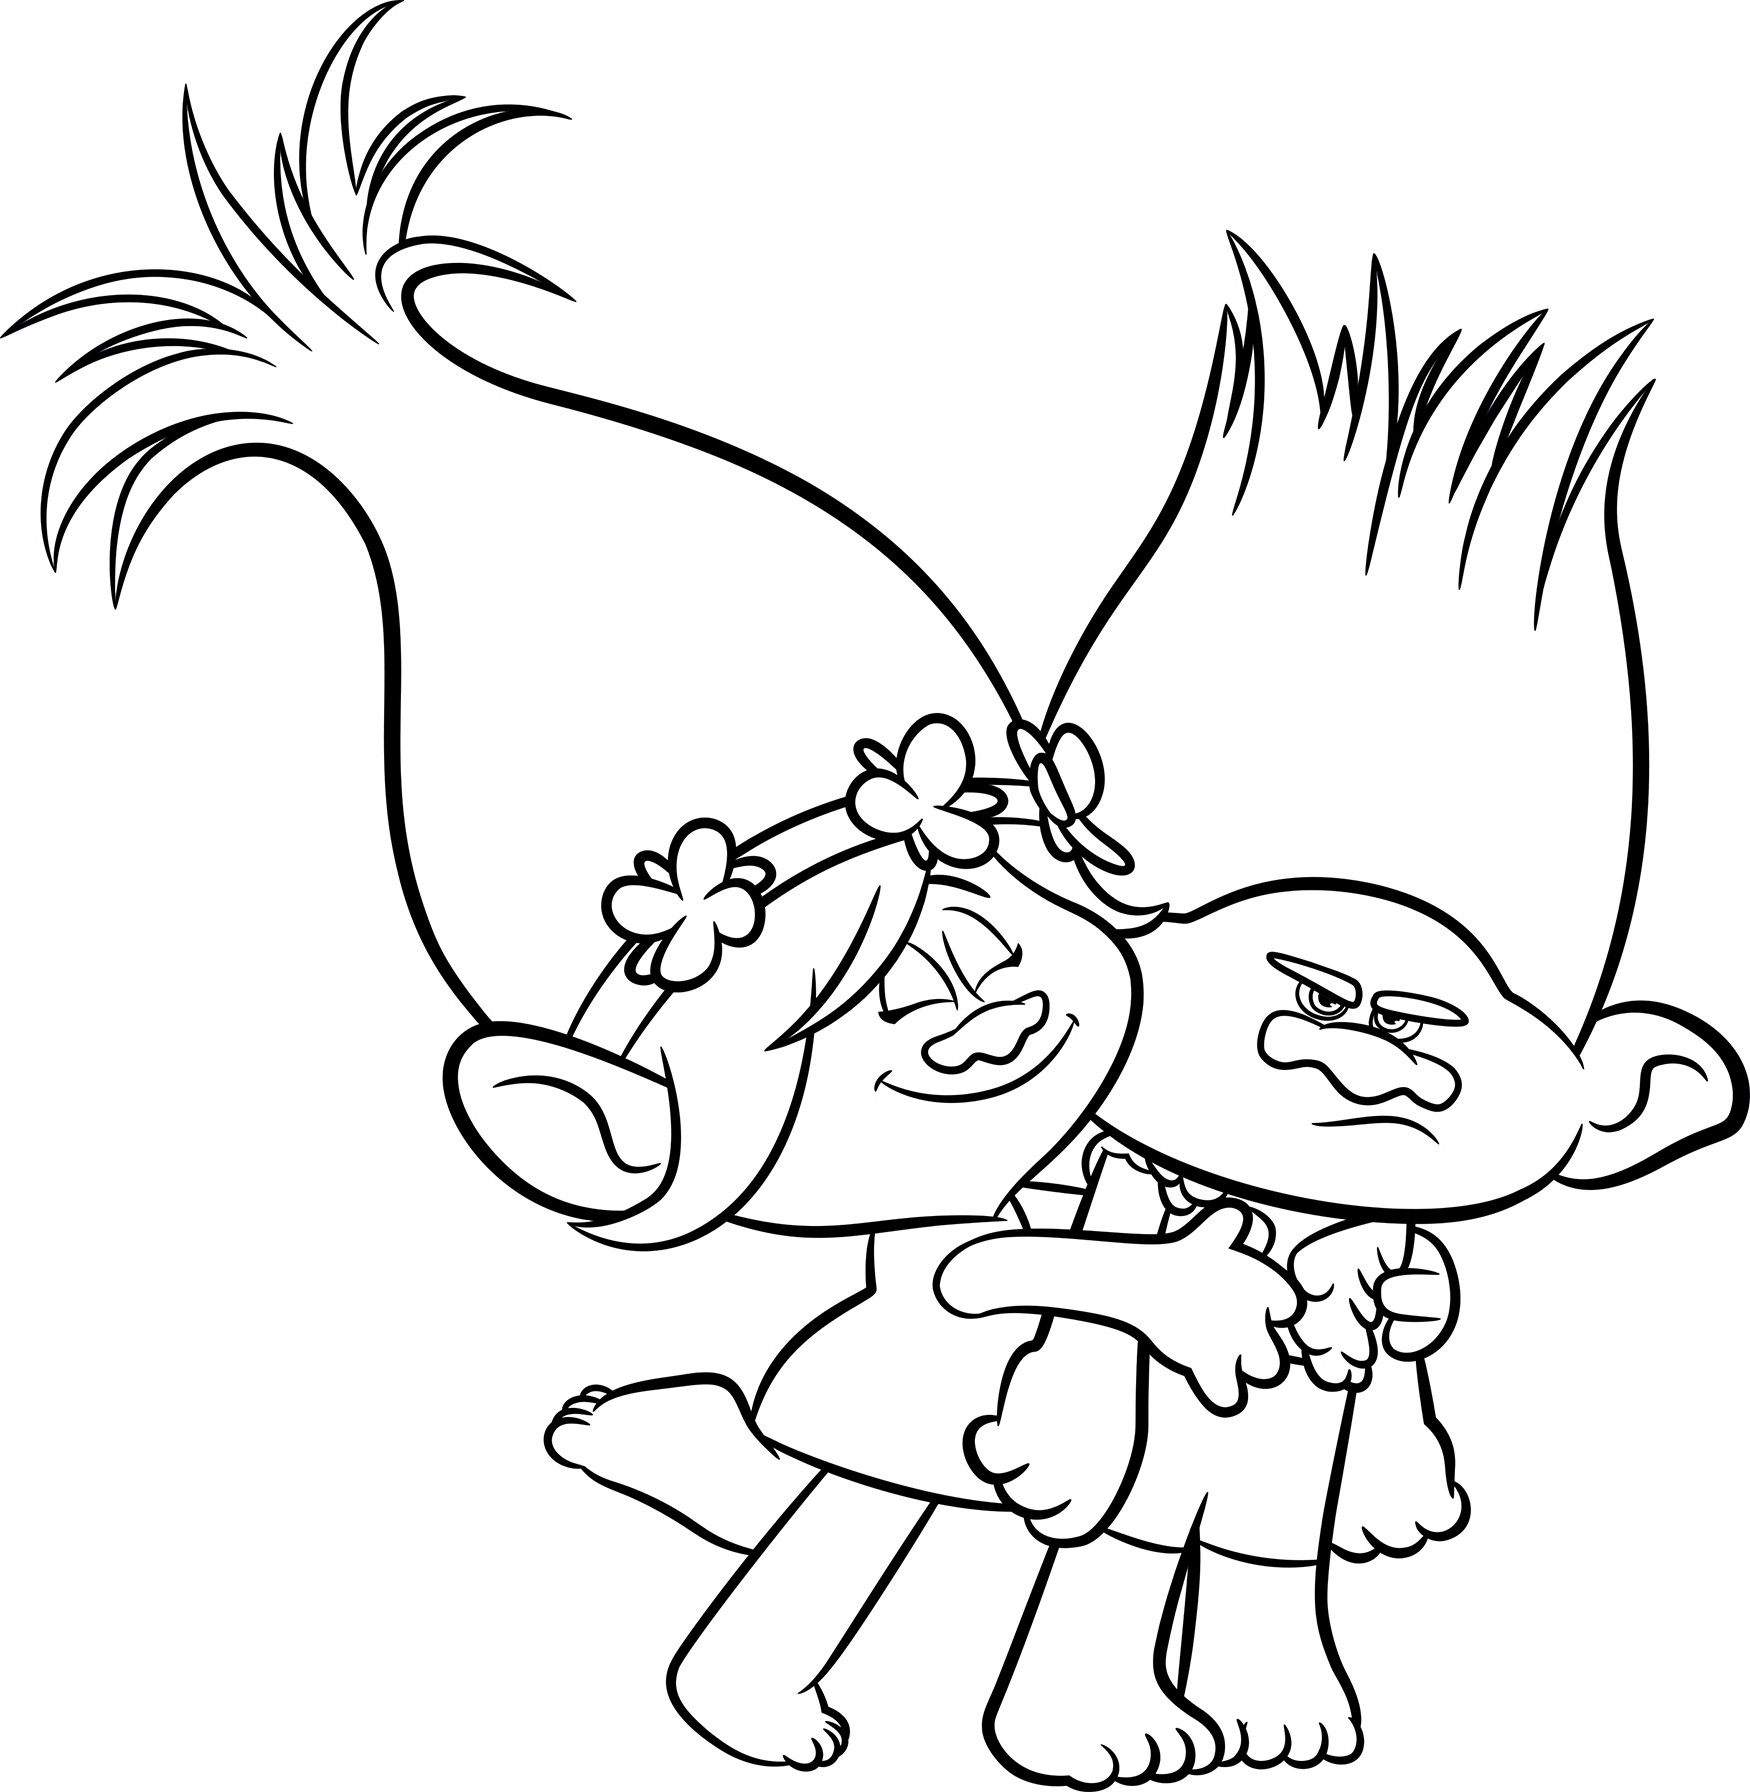 princess-poppy-and-branch-coloring-page-of-princess-poppy-and-branch-coloring-page Princess Poppy and Branch Coloring Page Cartoon 